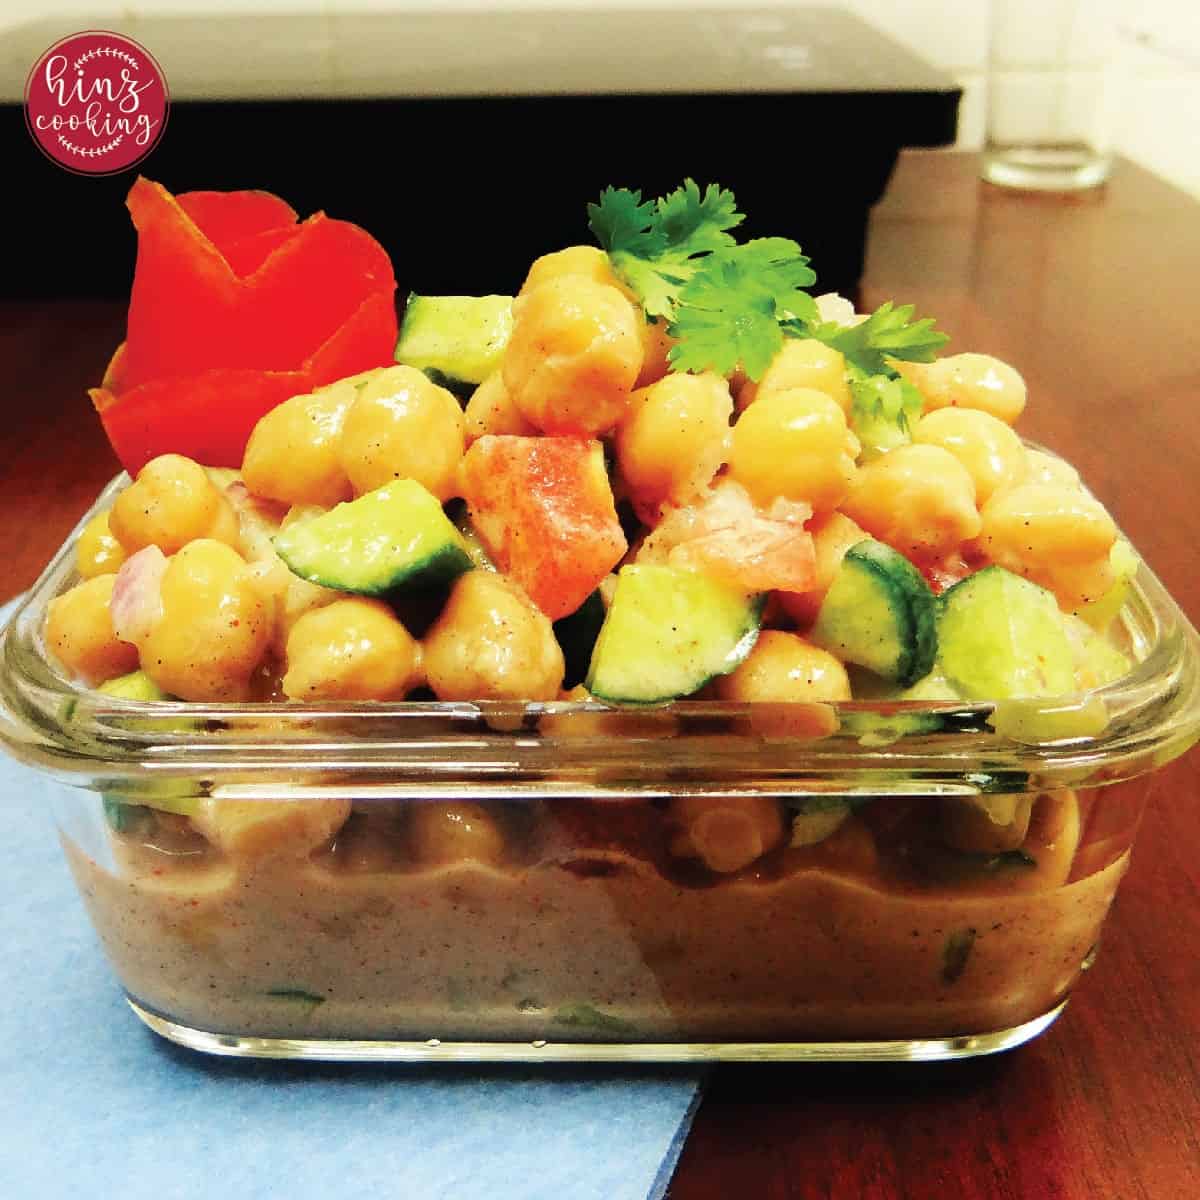 bowl of Indian chickpea salad packed with veggies and yogurt salad dressing